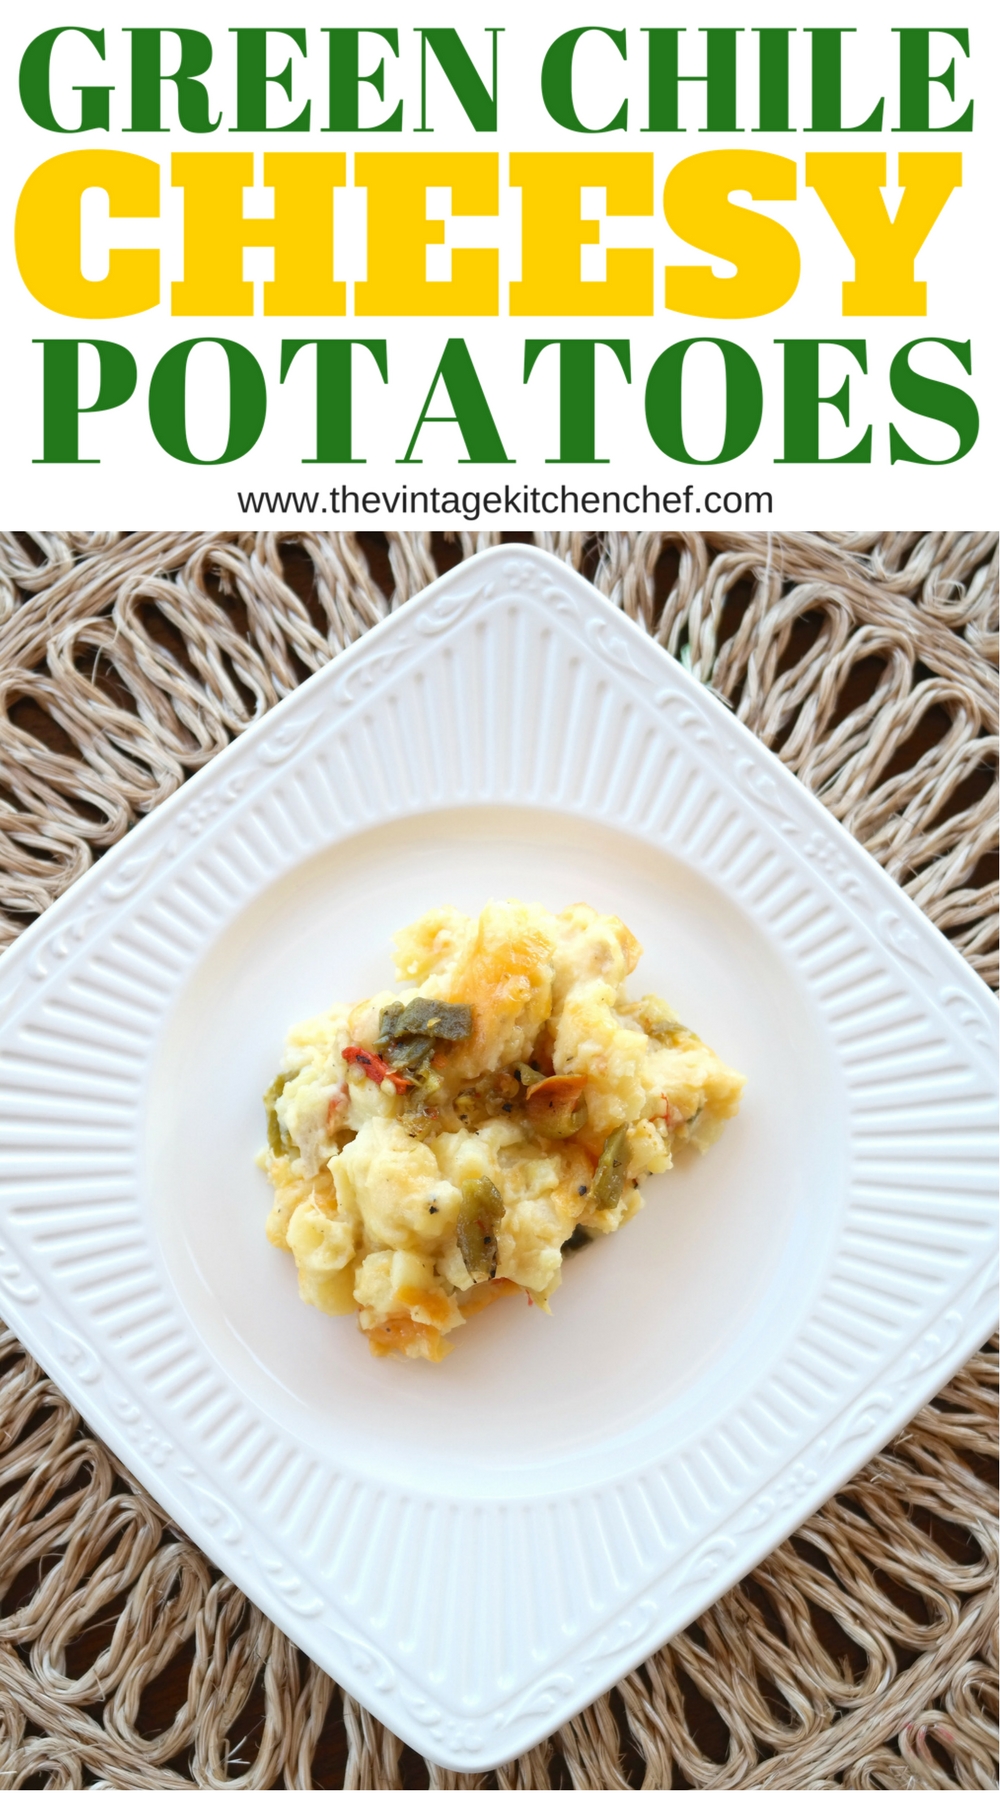 Green Chile Cheesy Potatoes mingles together cheesy mashed potatoes with the spiciness of flavorful green chile. Great as a side dish or main entree.